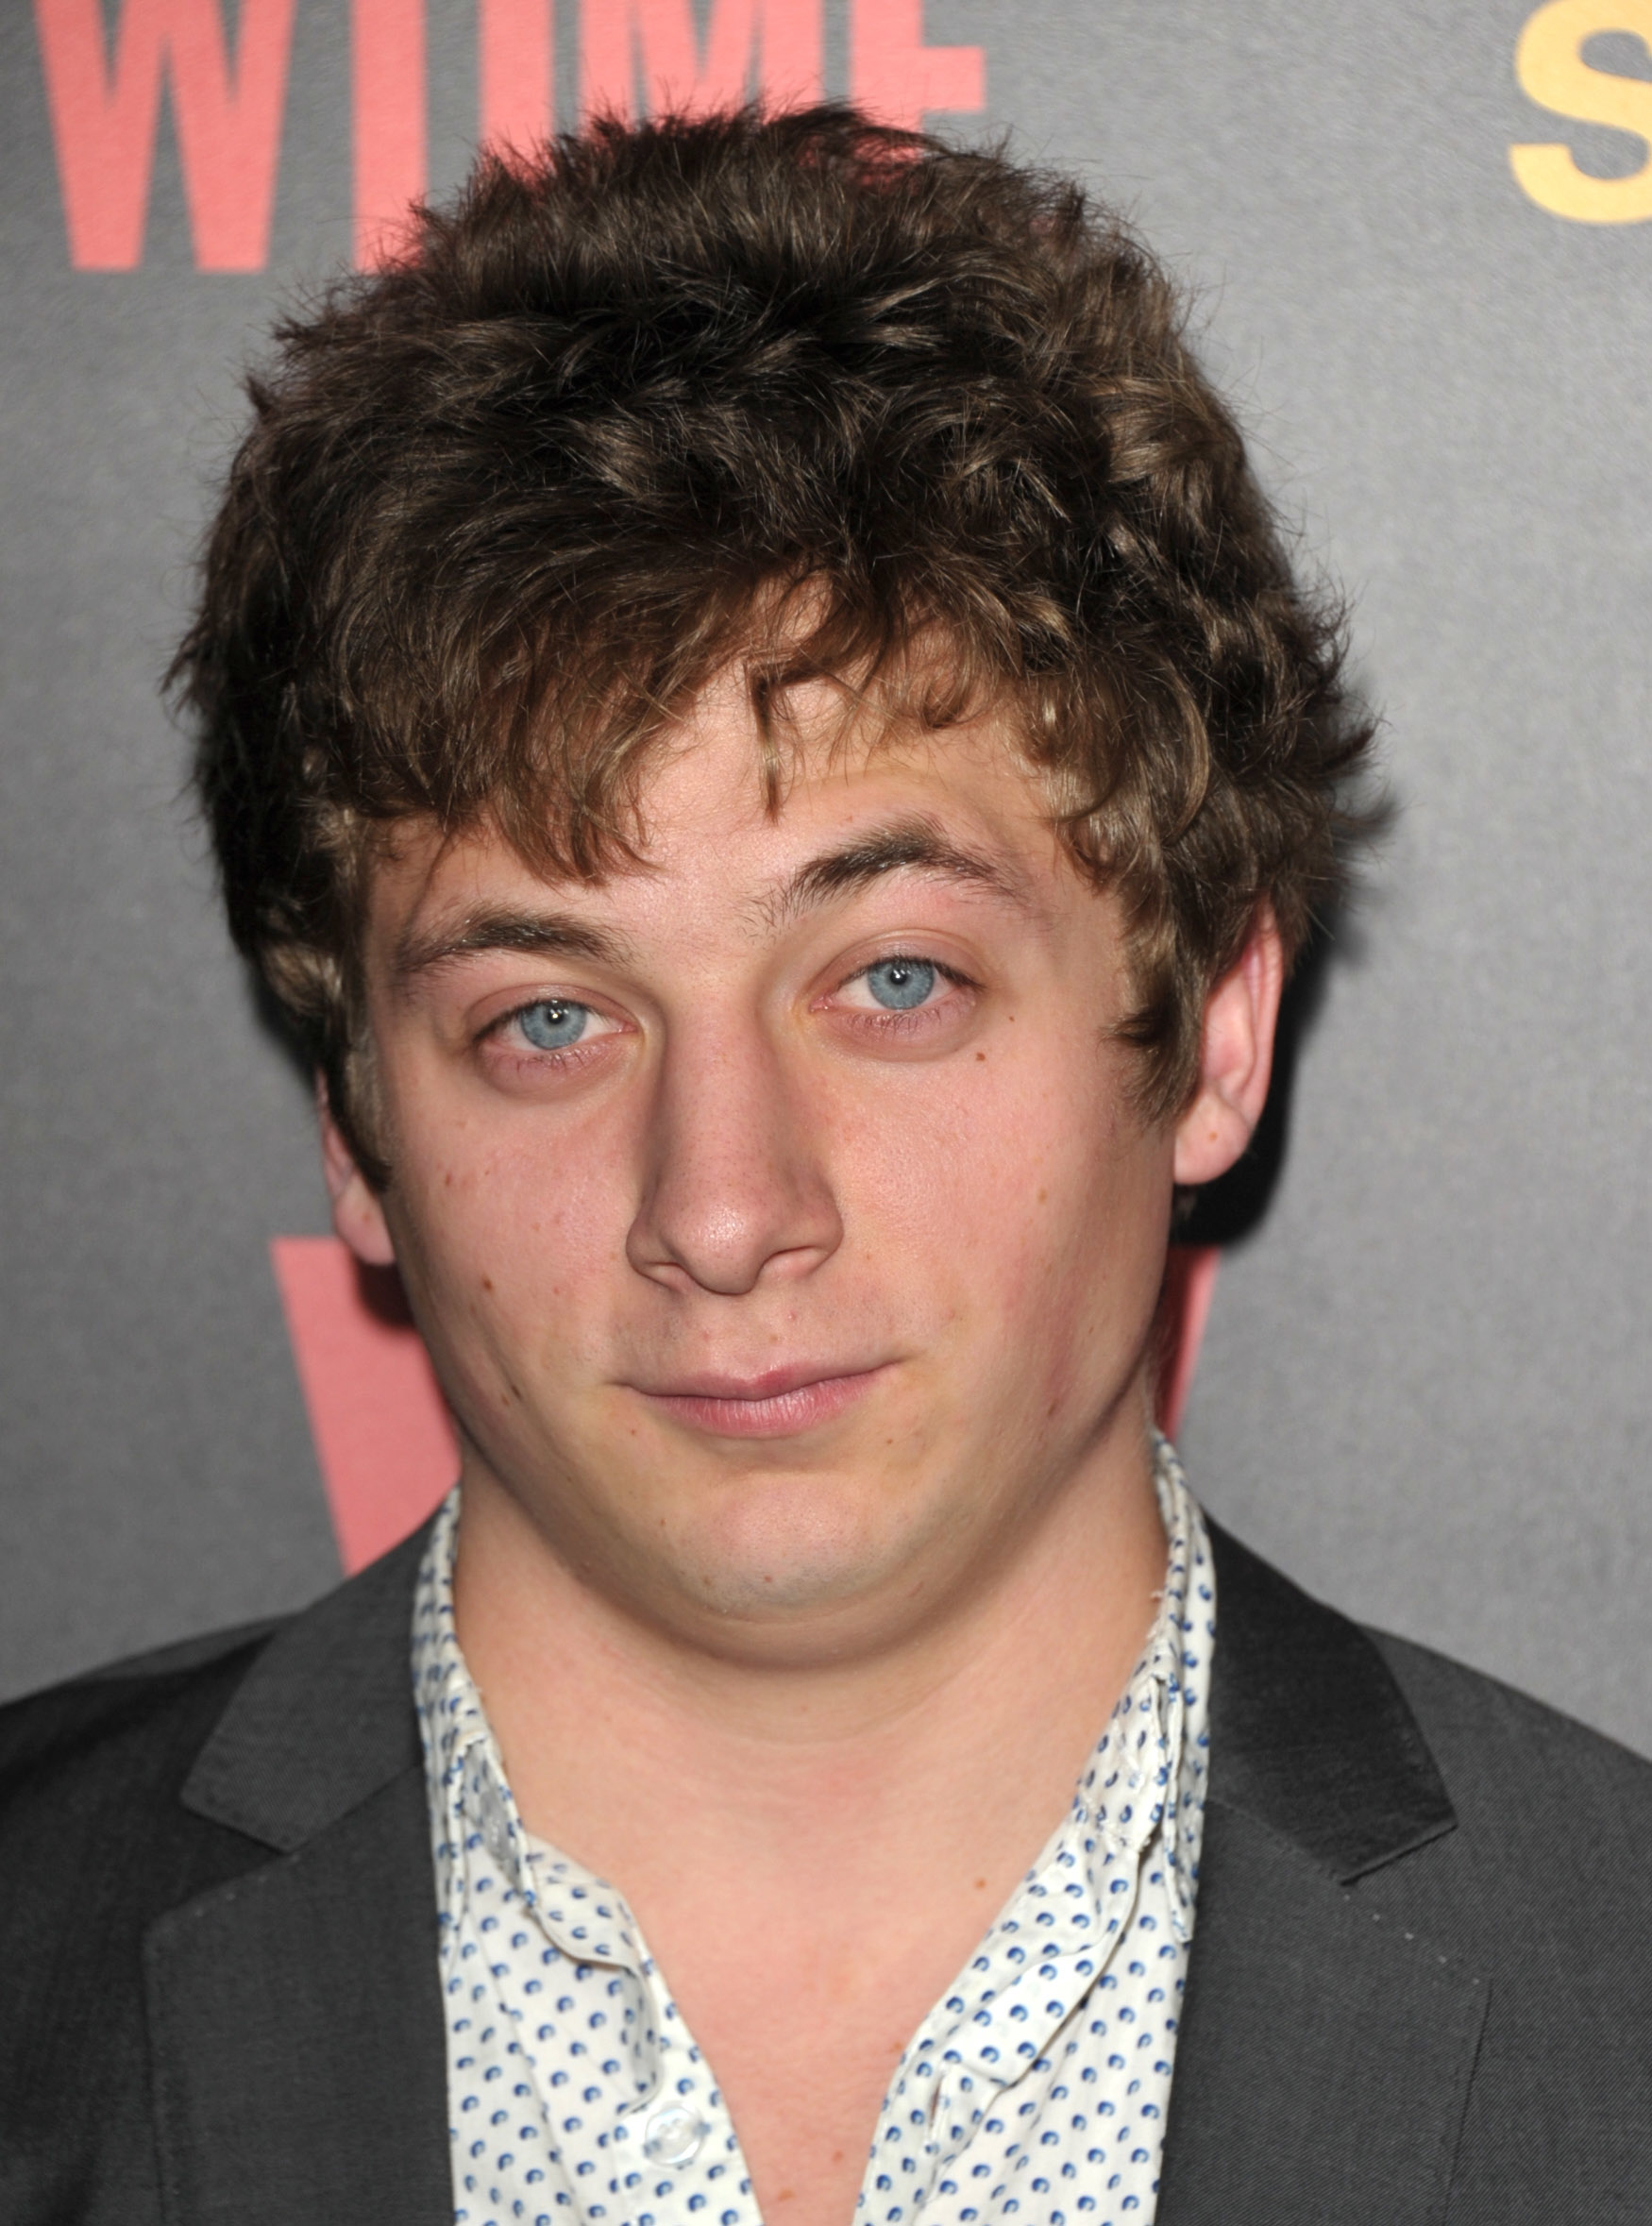 Jeremy Allen White in a dark jacket and collared shirt with at the premiere of Shameless Season 2. At the time, Jeremy had short hair